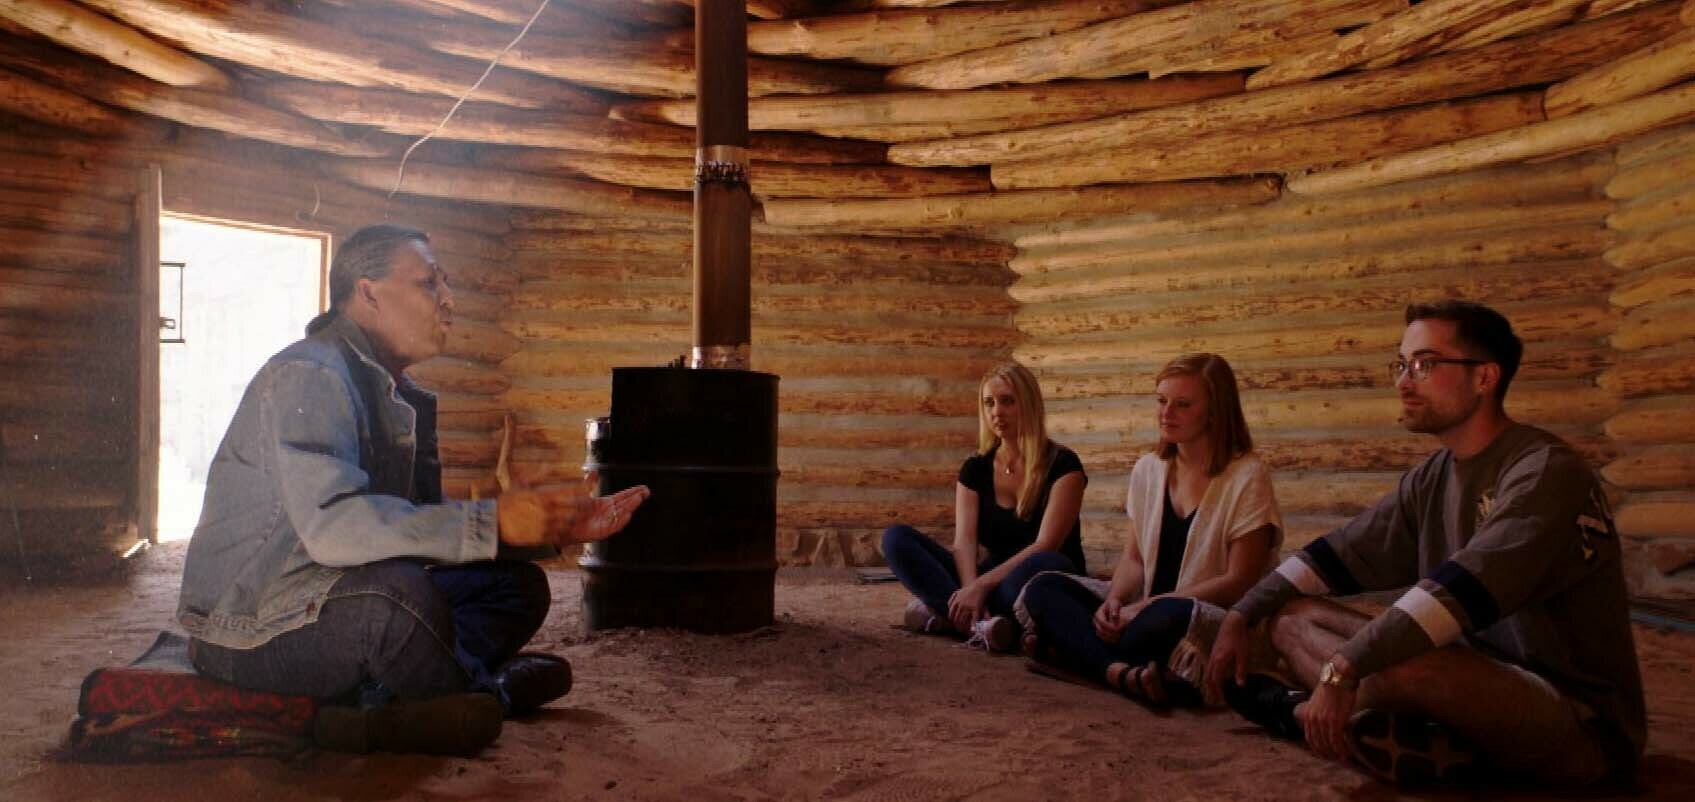 Three students and a man sit inside a curved wooden building.